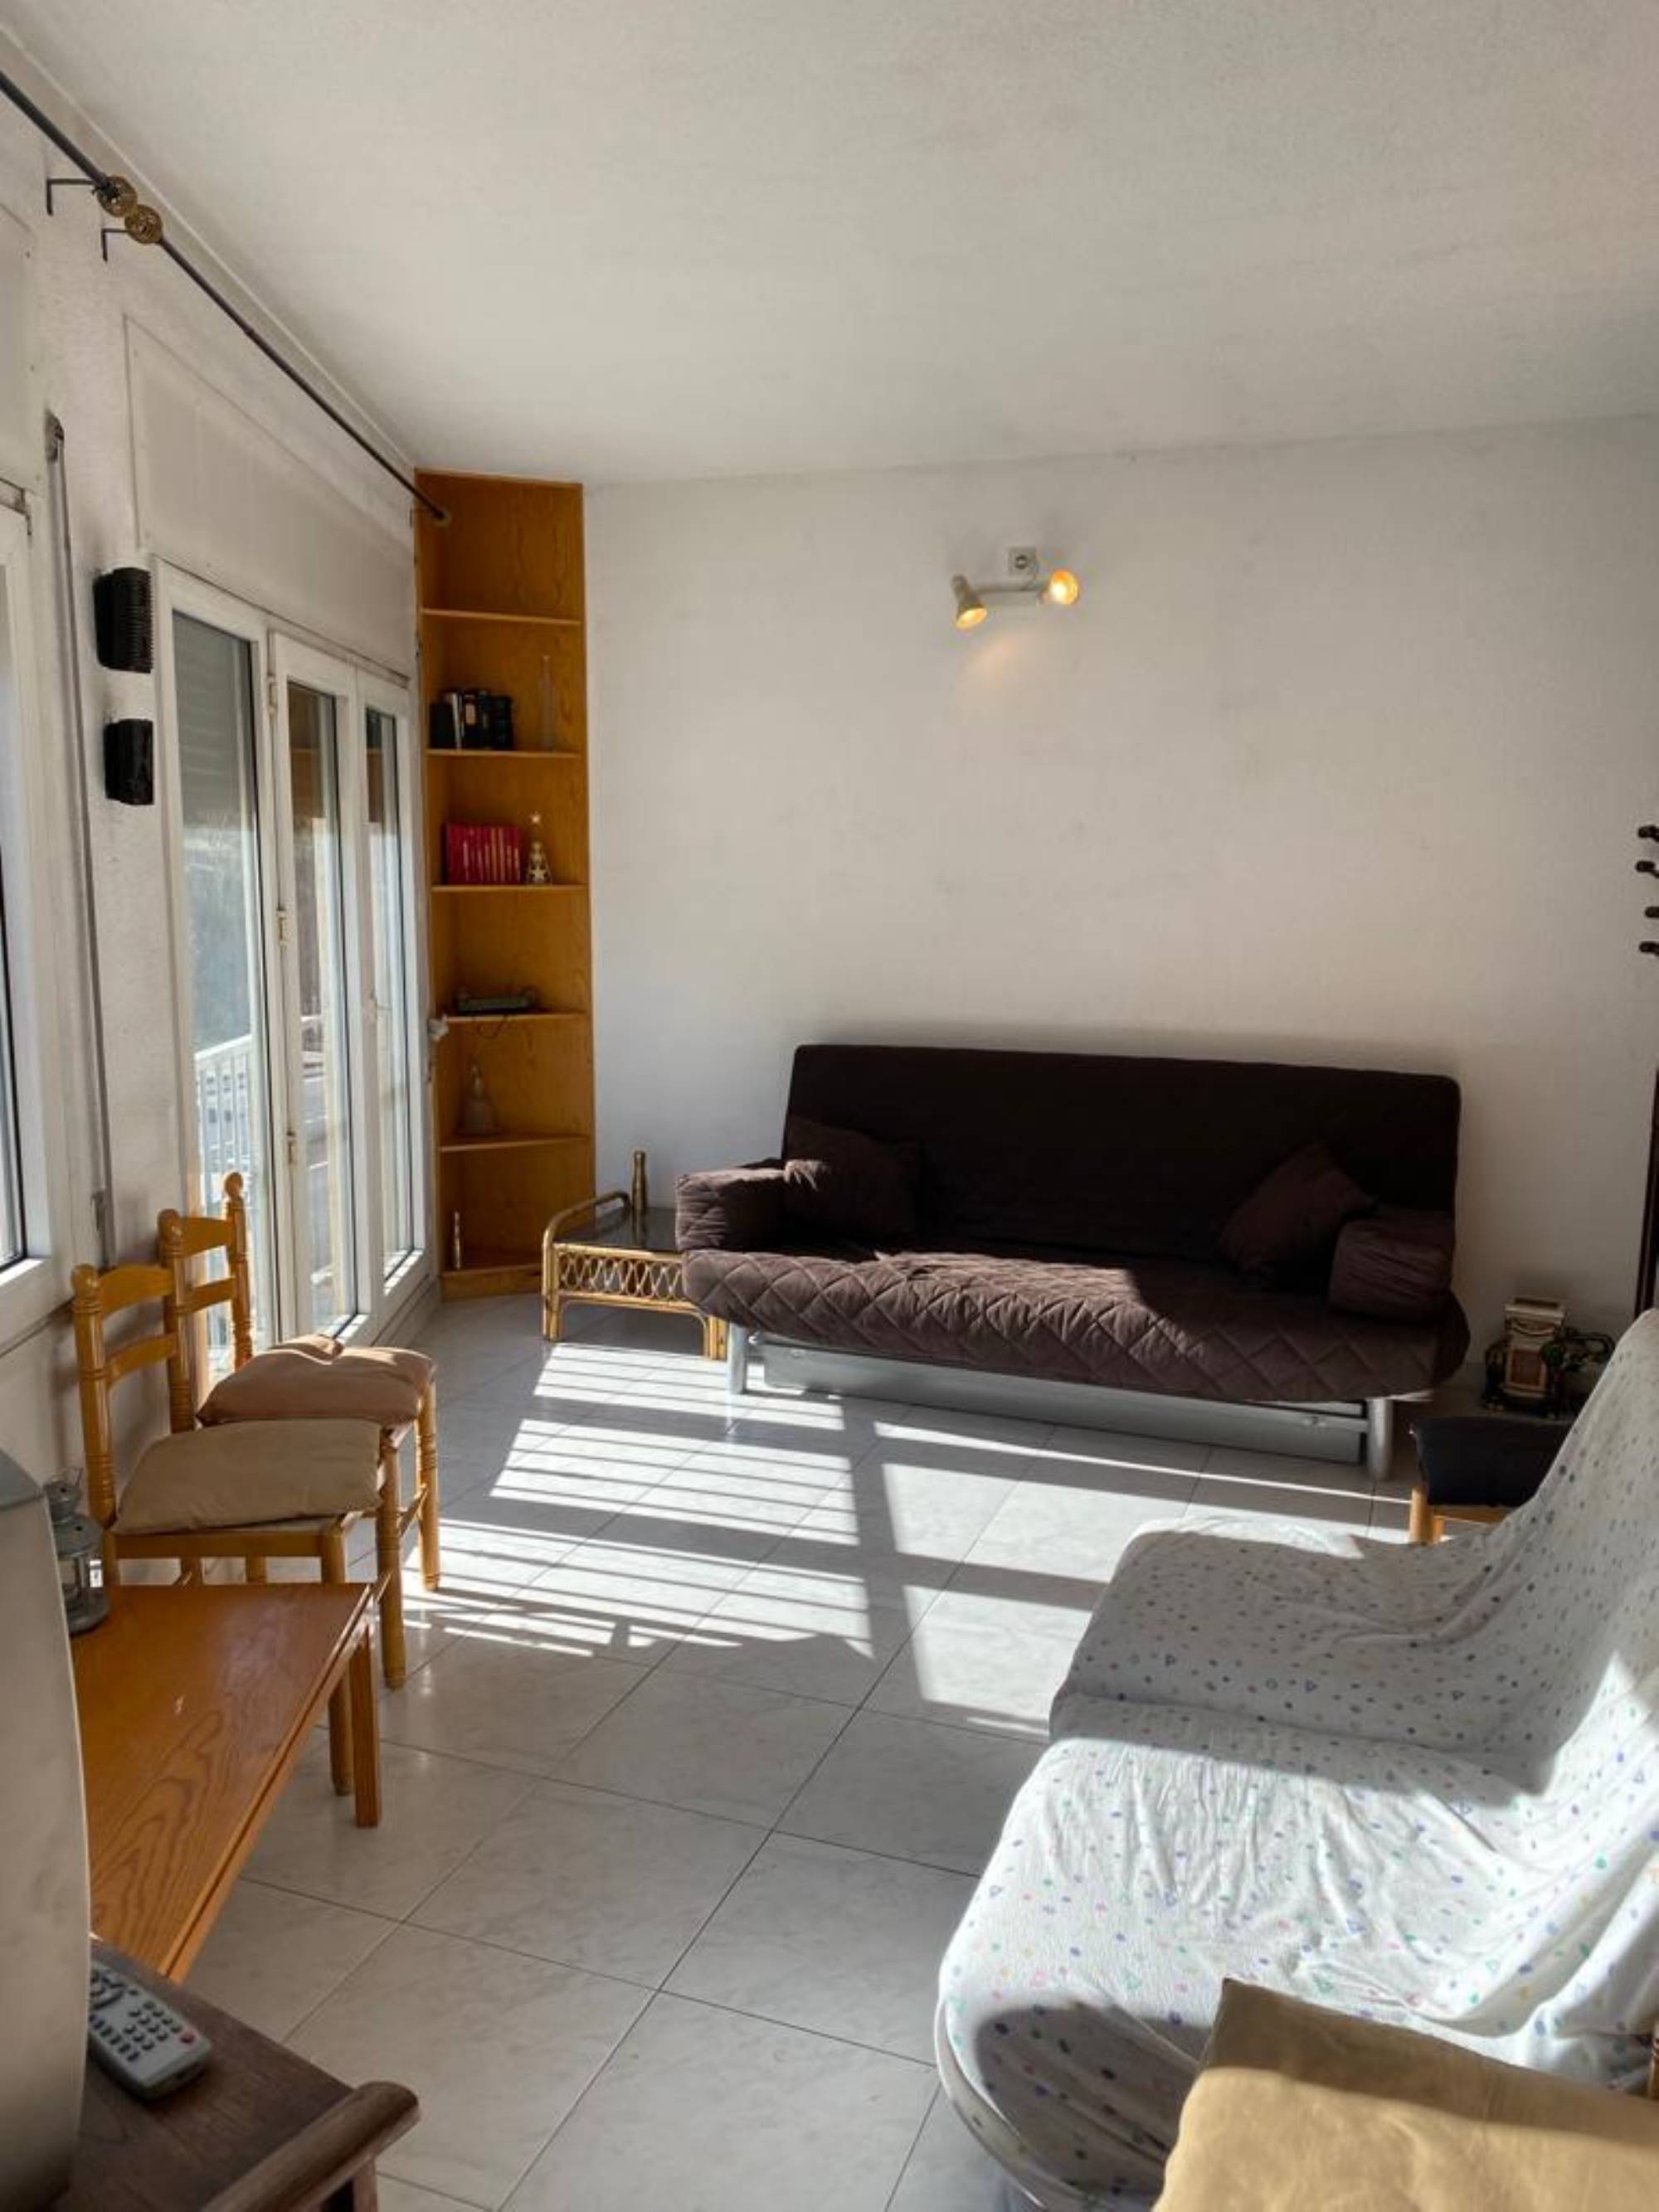 House for Rent in L'Aldosa